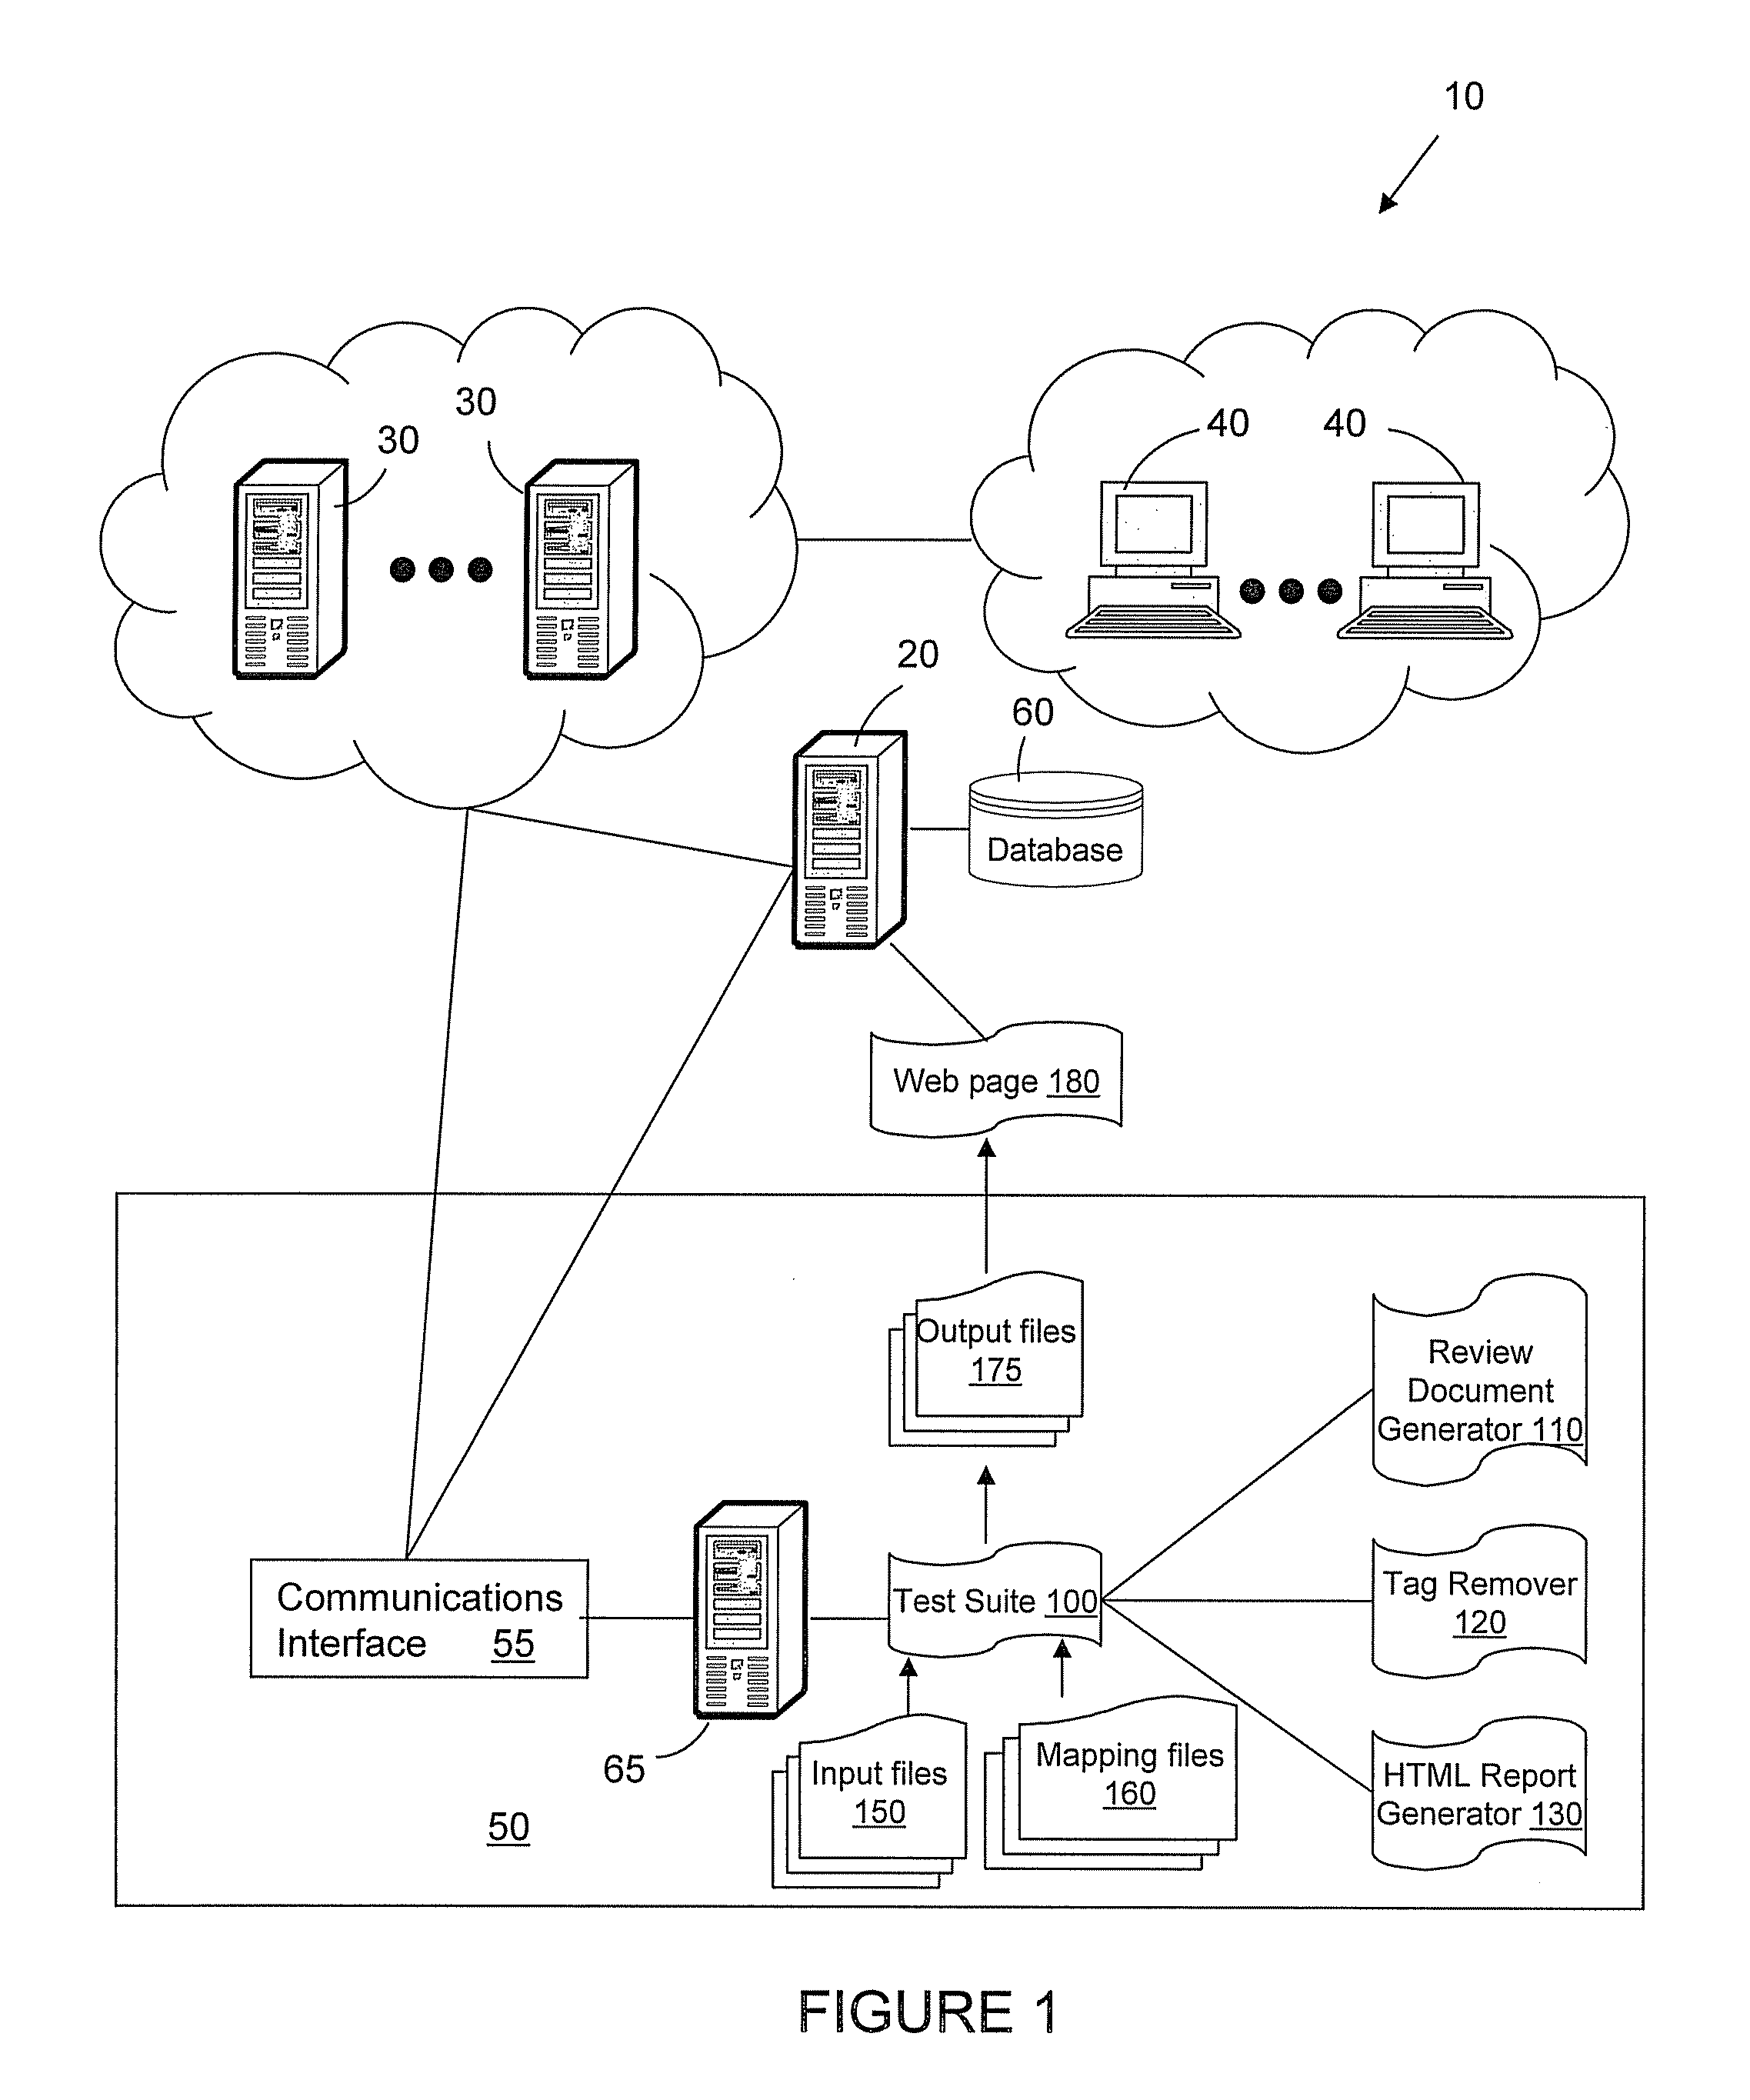 Managing access in one or more computing systems